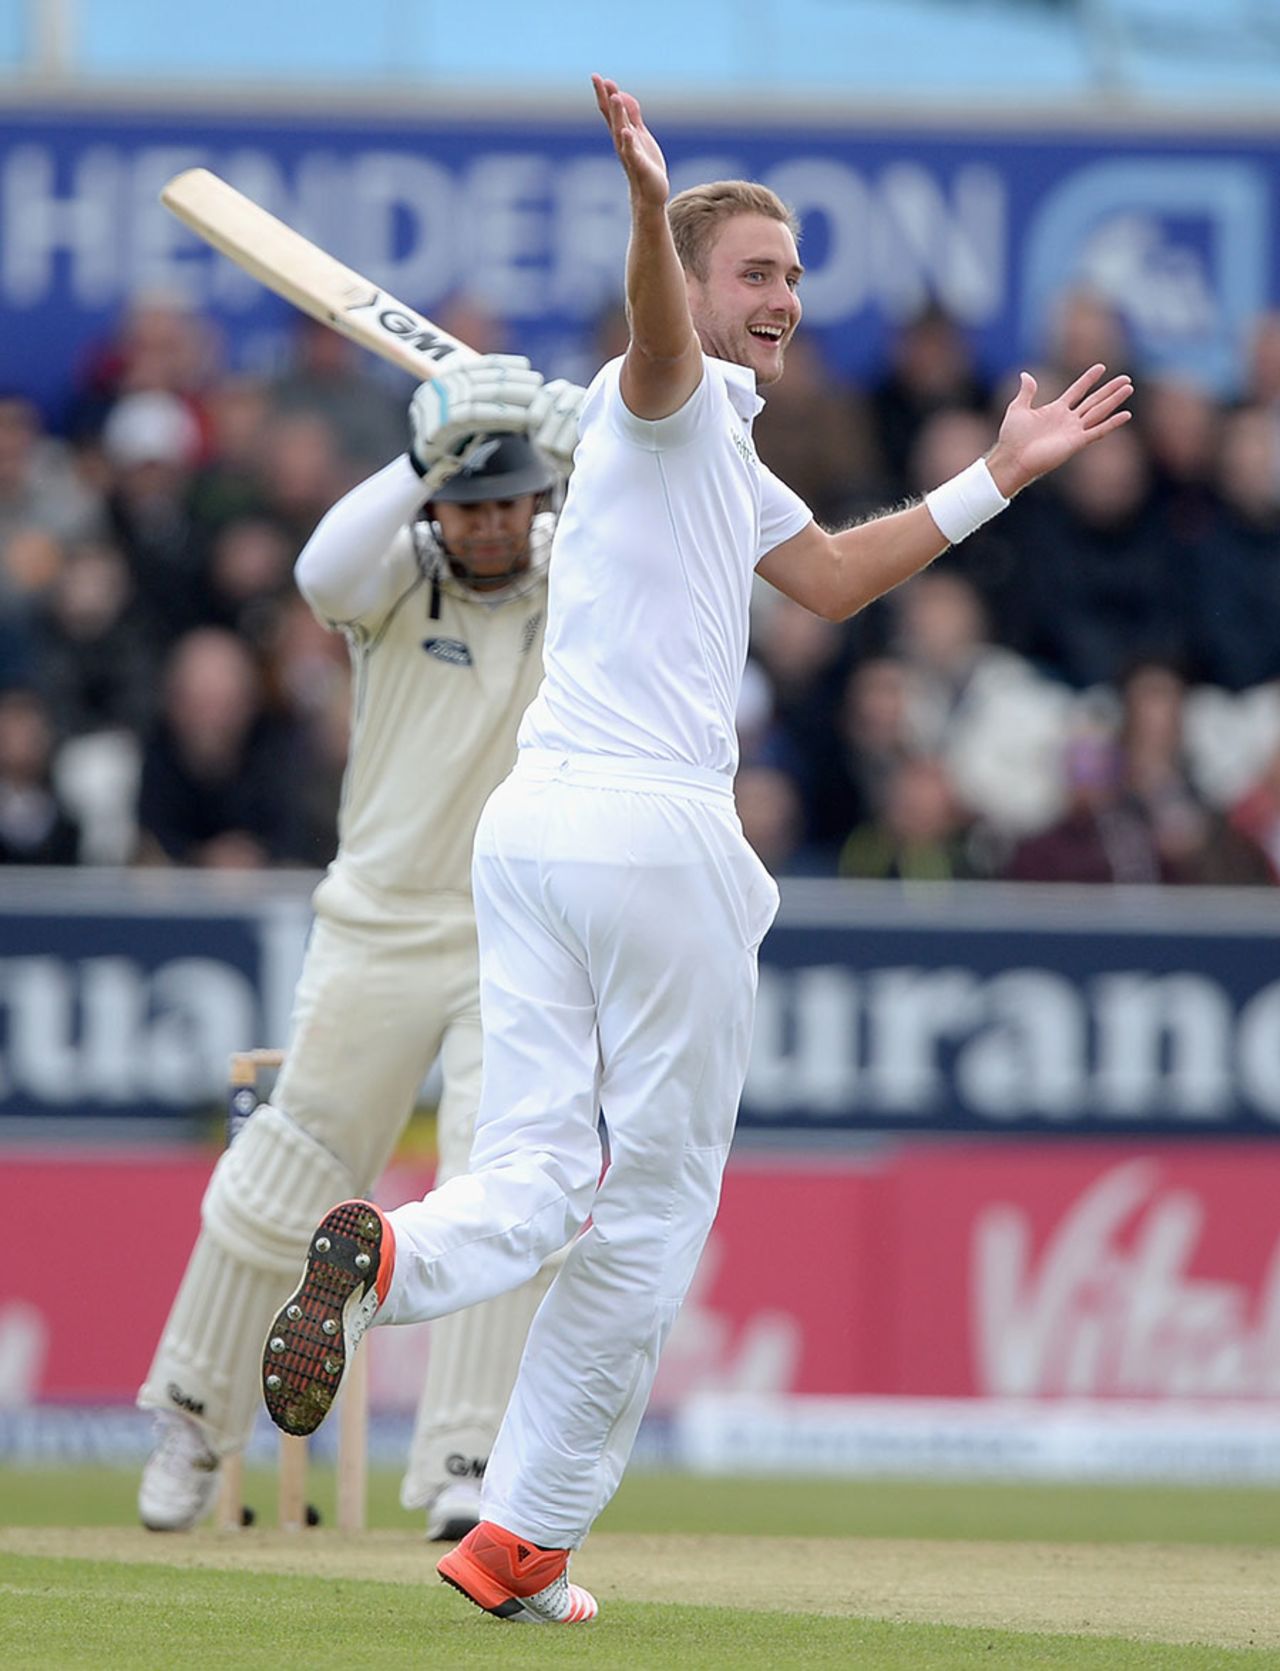 Stuart Broad had Ross Taylor lbw shouldering arms, England v New Zealand, 2nd Investec Test, Headingley, 1st day, May 29, 2015